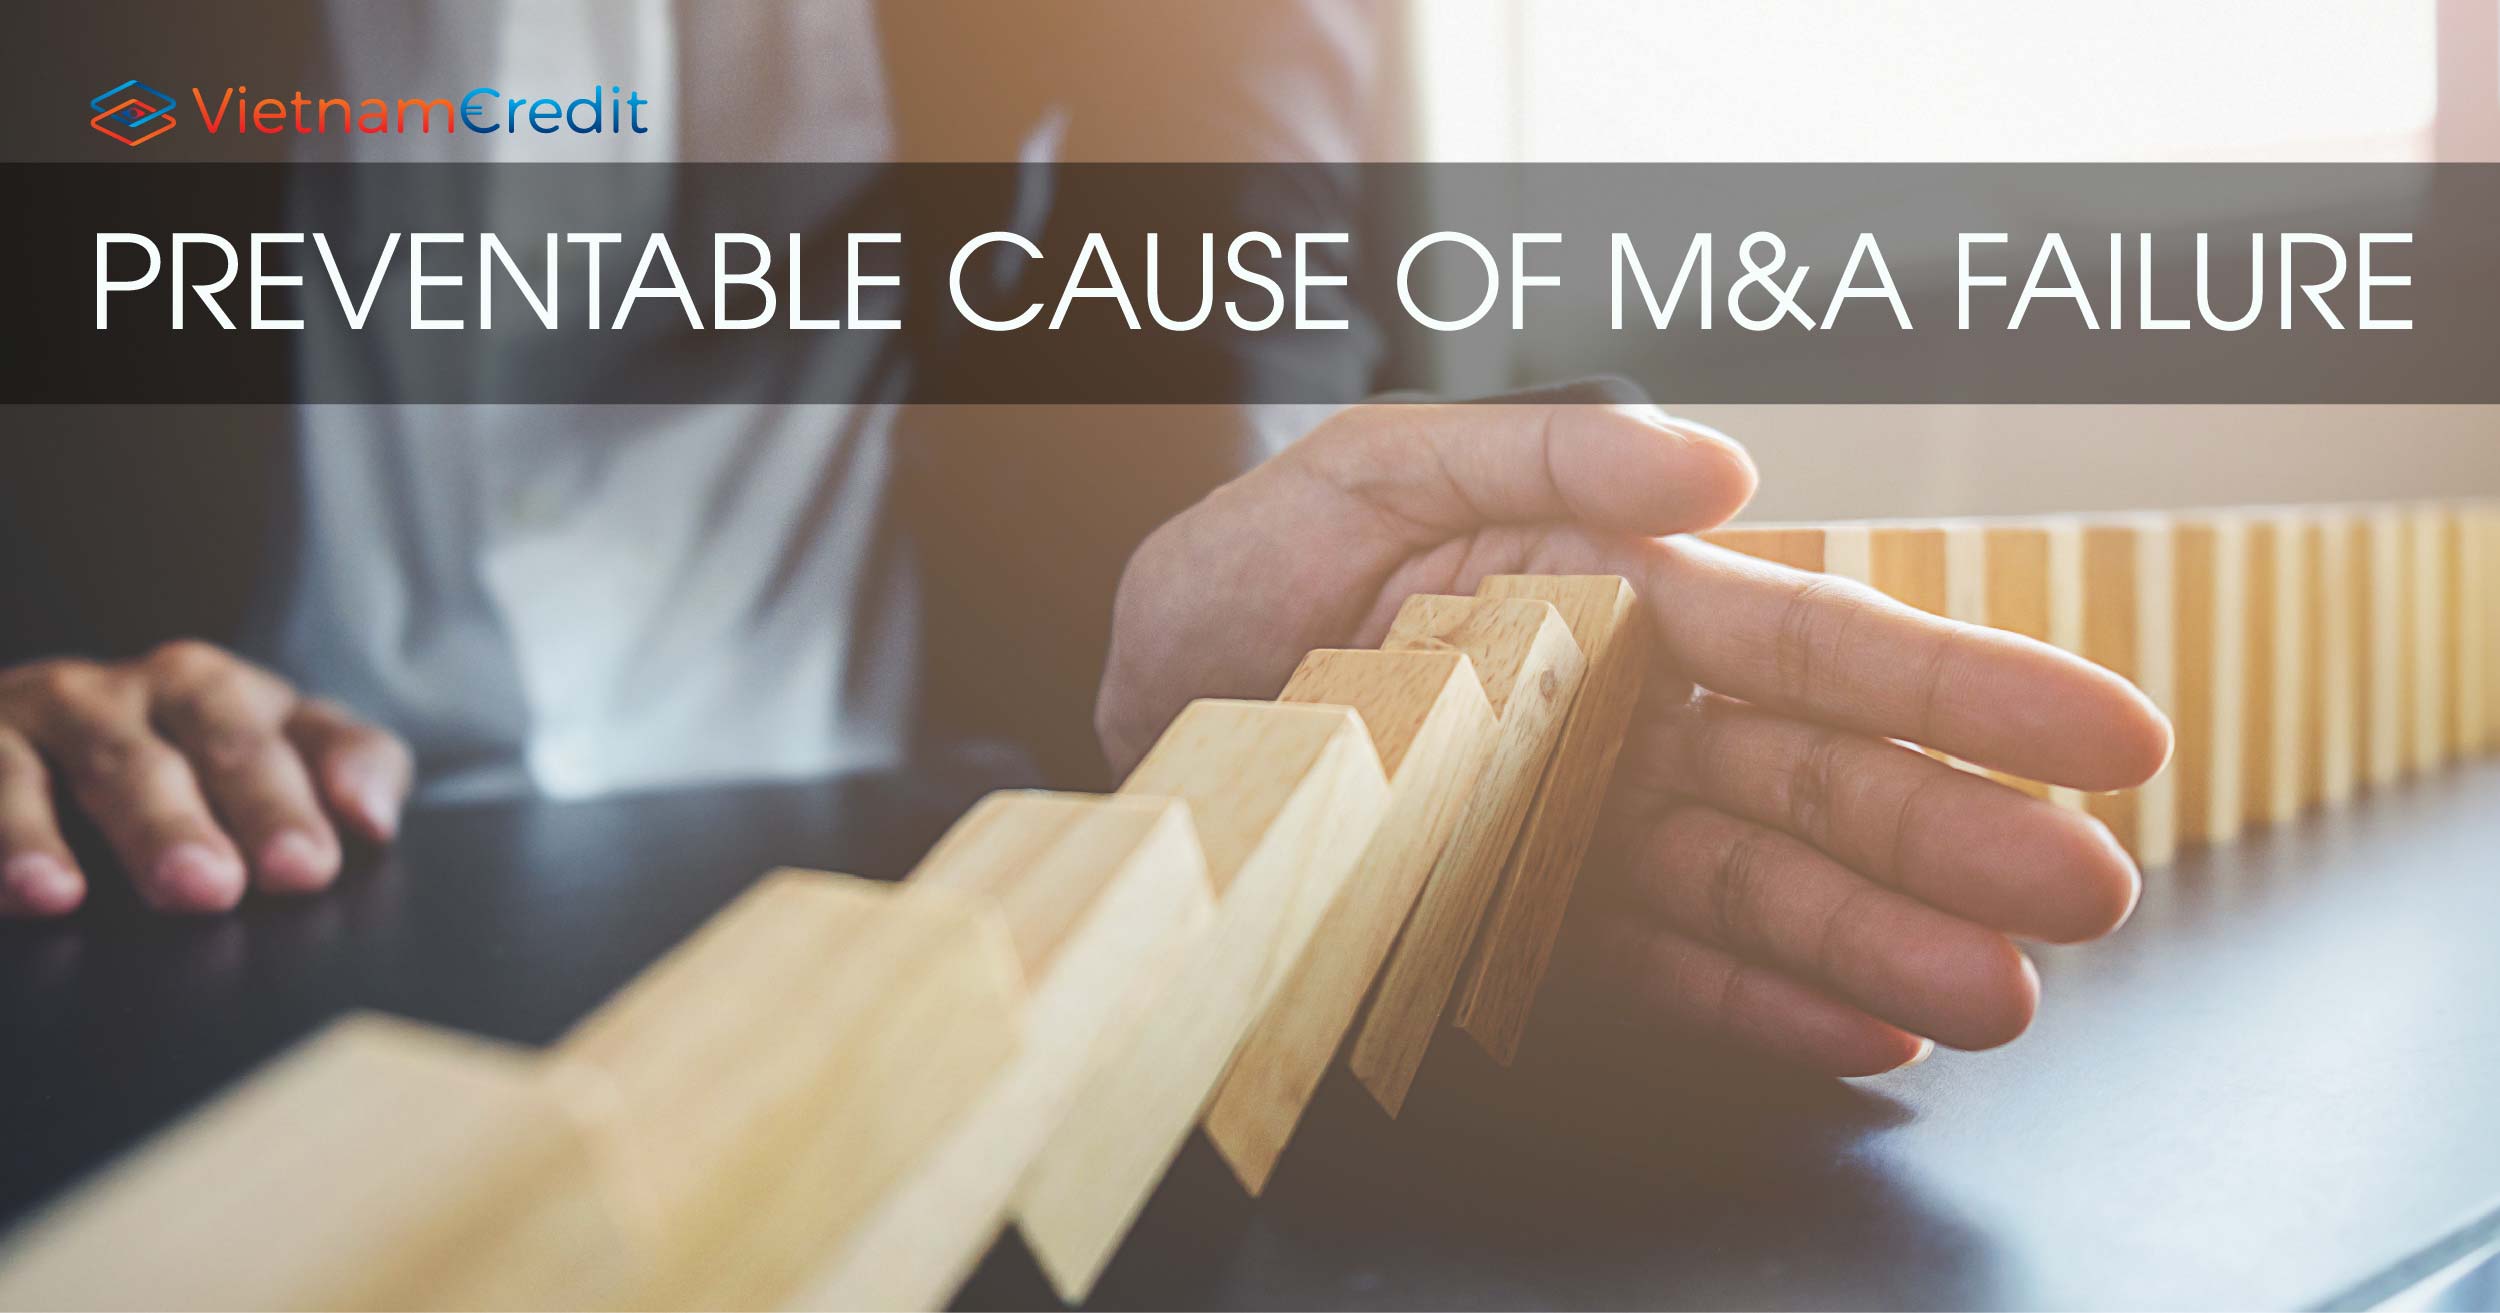 Preventable causes of M&A failure